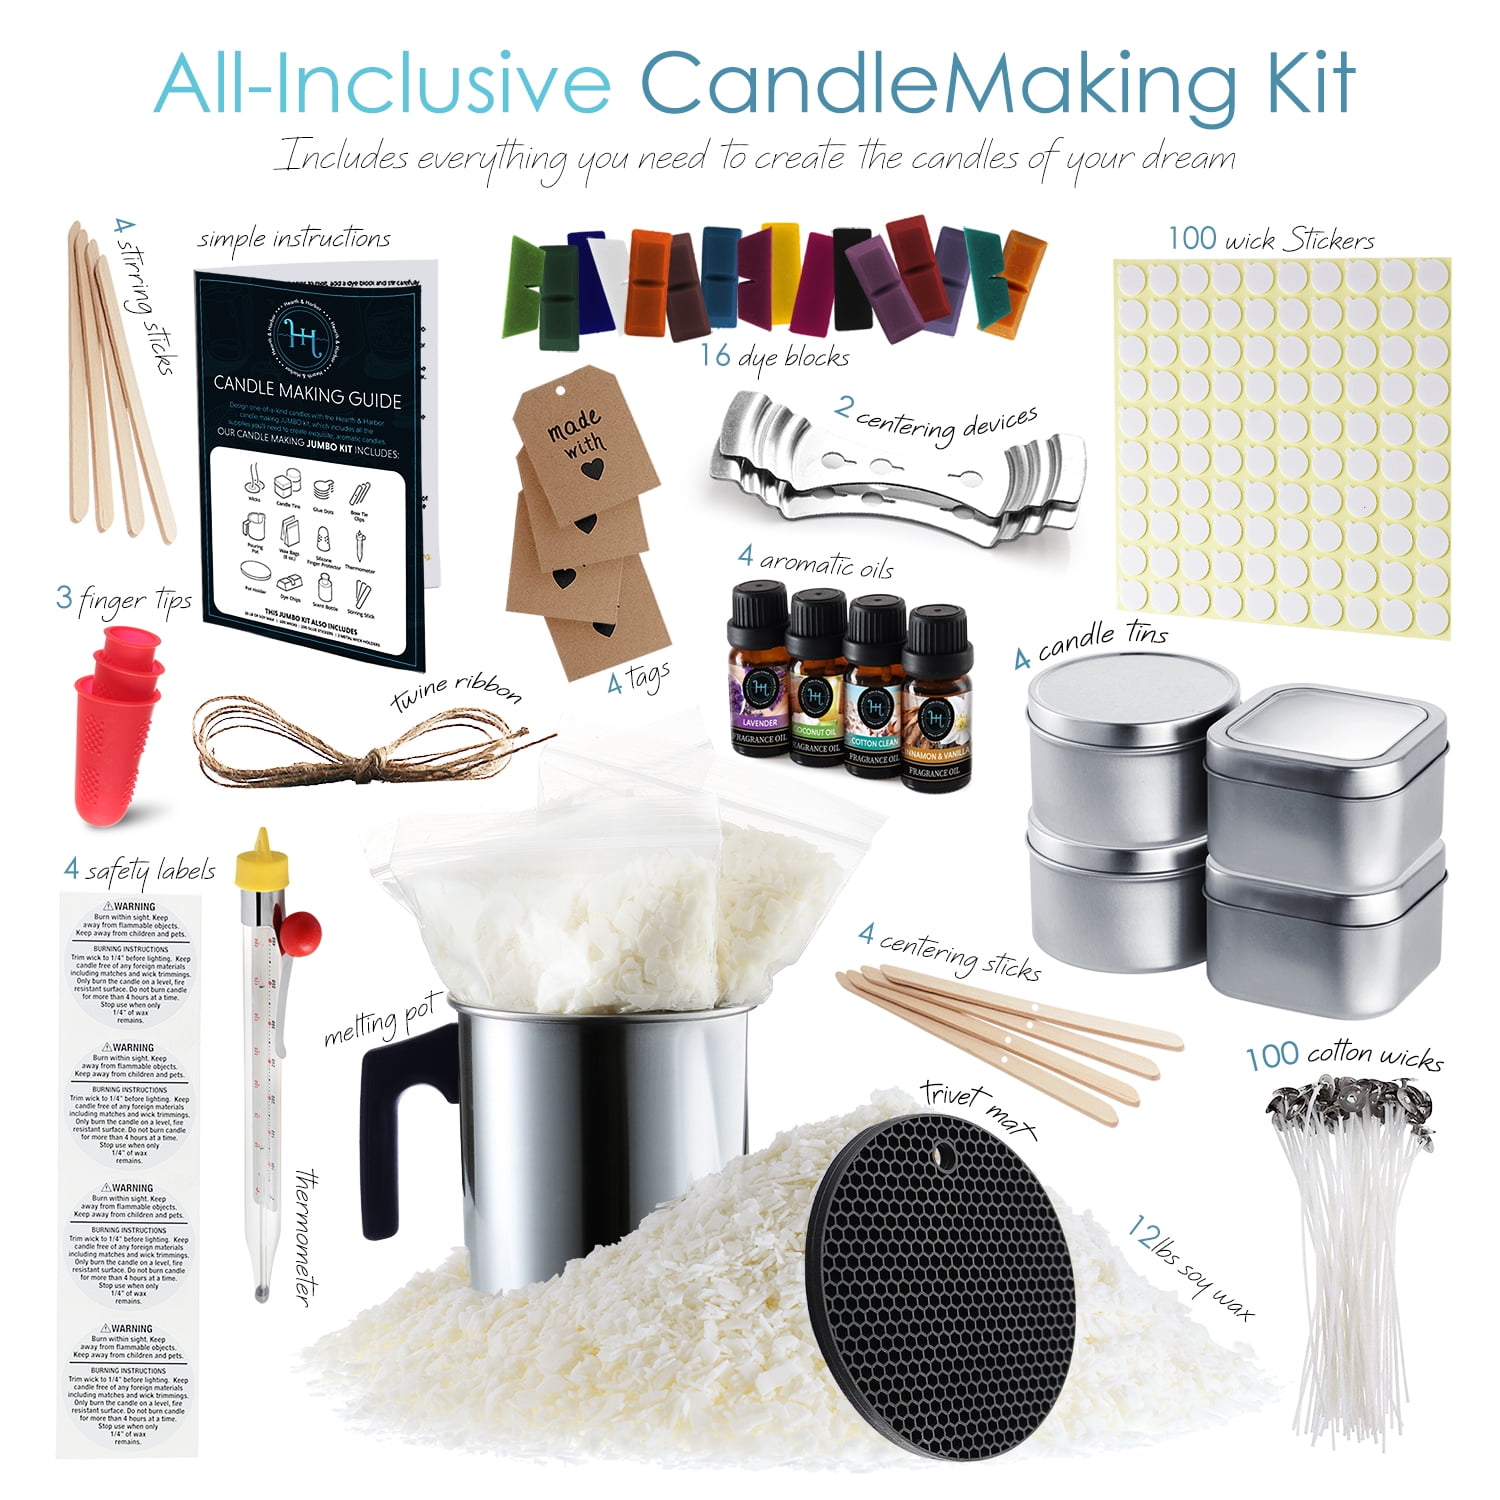  TBWIND Candle Making Kit, Soy Candle Making Supplies DIY Candle Craft  Tools for Adults, Kids, Beginners with 8 Pleasant Scents, Melting Pot,  Wicks, Wax, Dyes & More - DIY Starter Candle